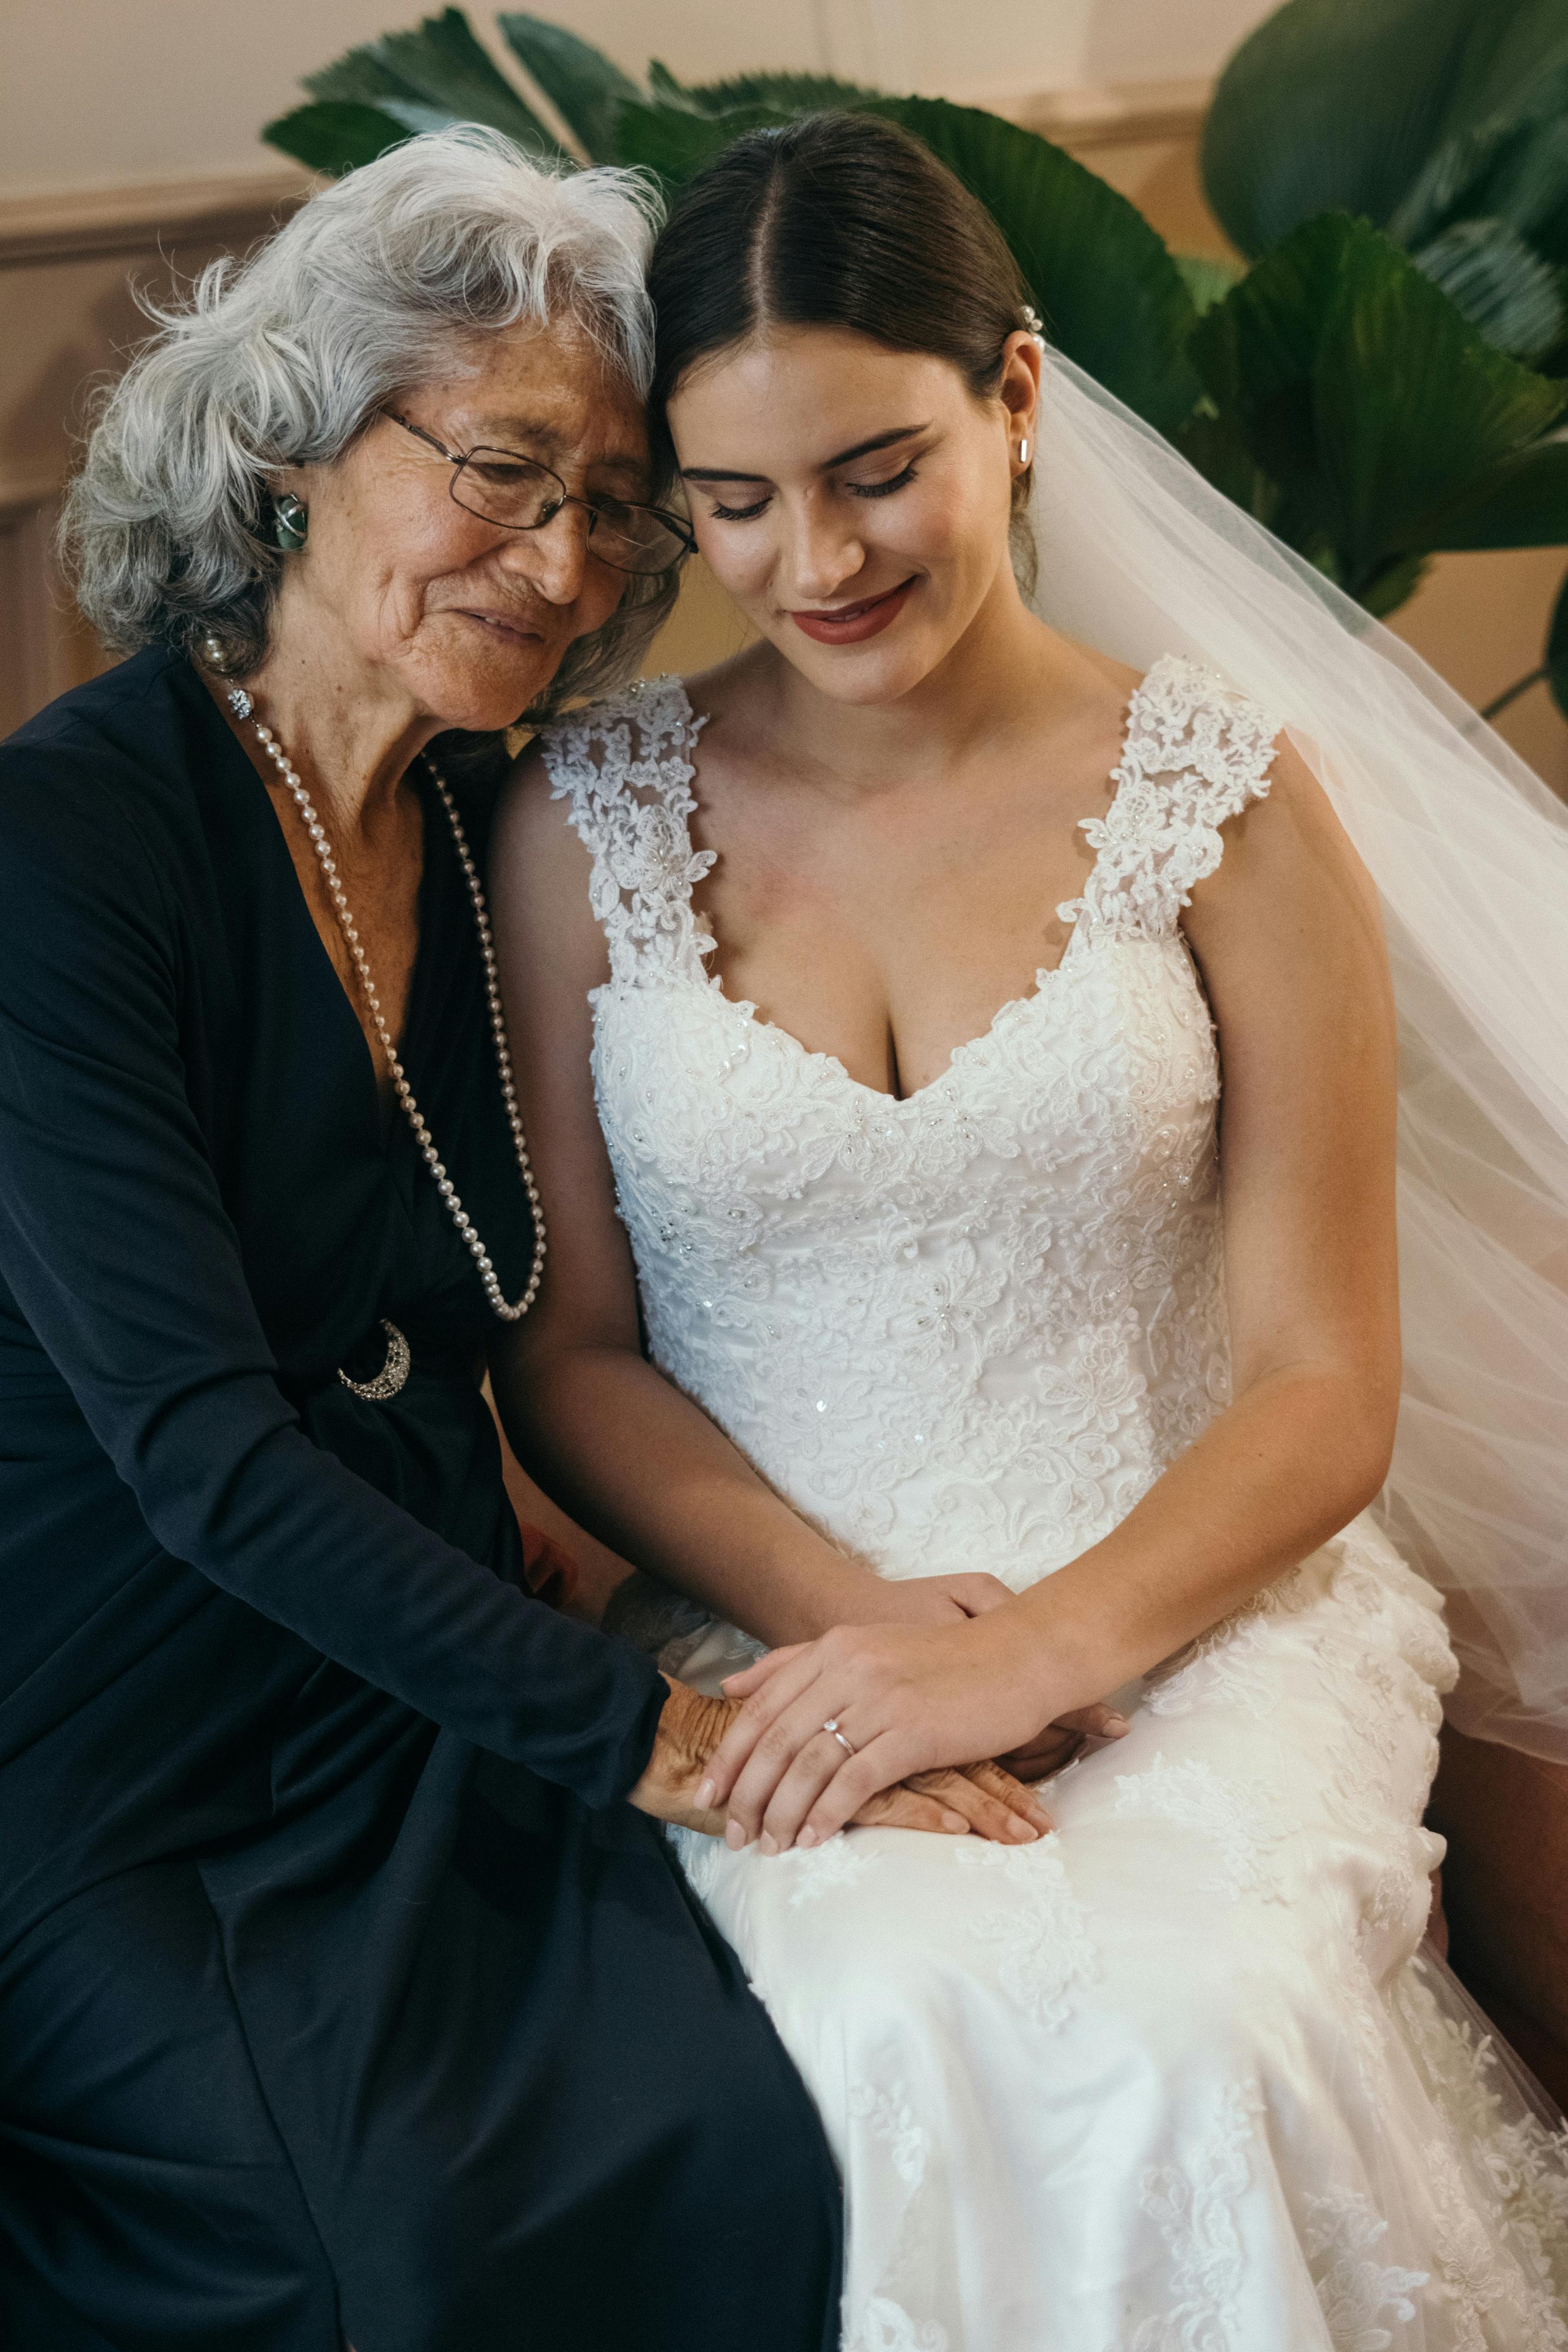 A bride-to-be seeks advice from her mother | Source: Pexels